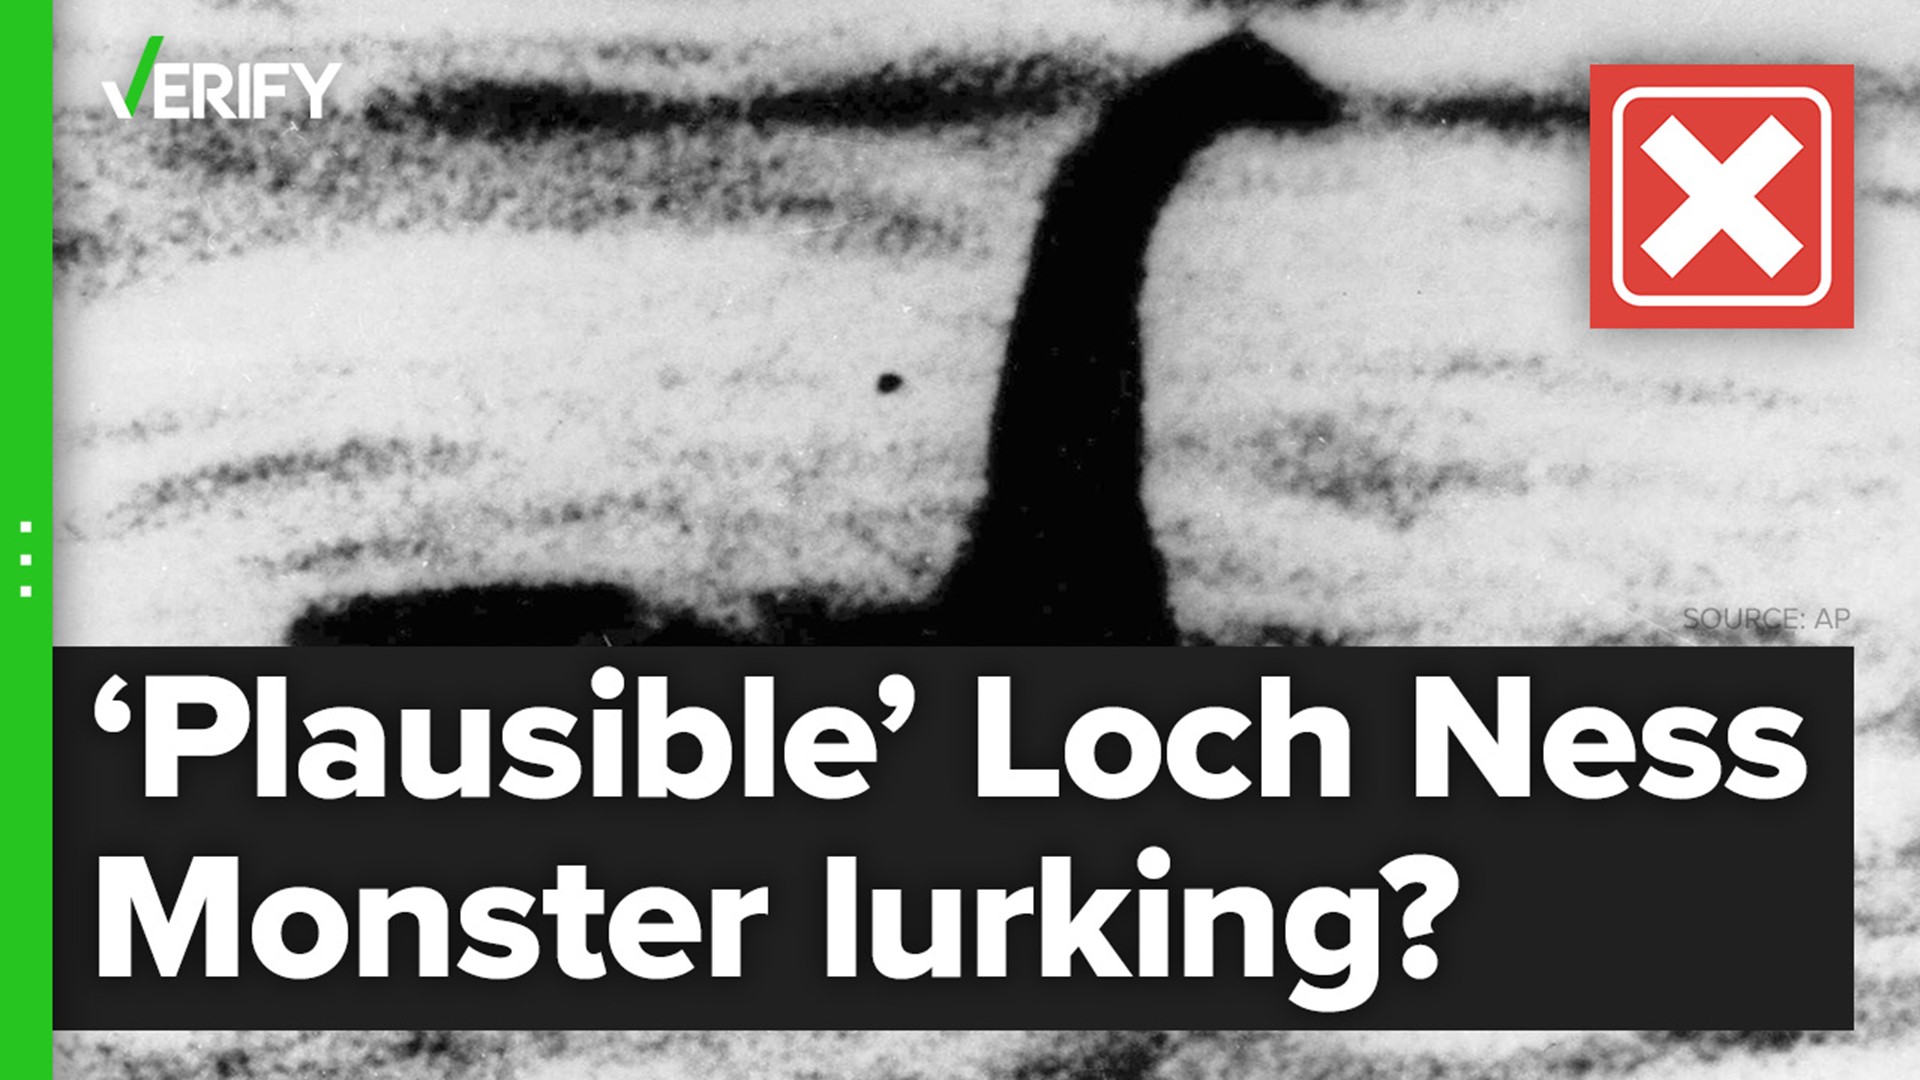 Headlines said scientists called Nessie of Loch Ness “plausible” after a fossil discovery, but the monster itself wasn’t what they believed could be real.